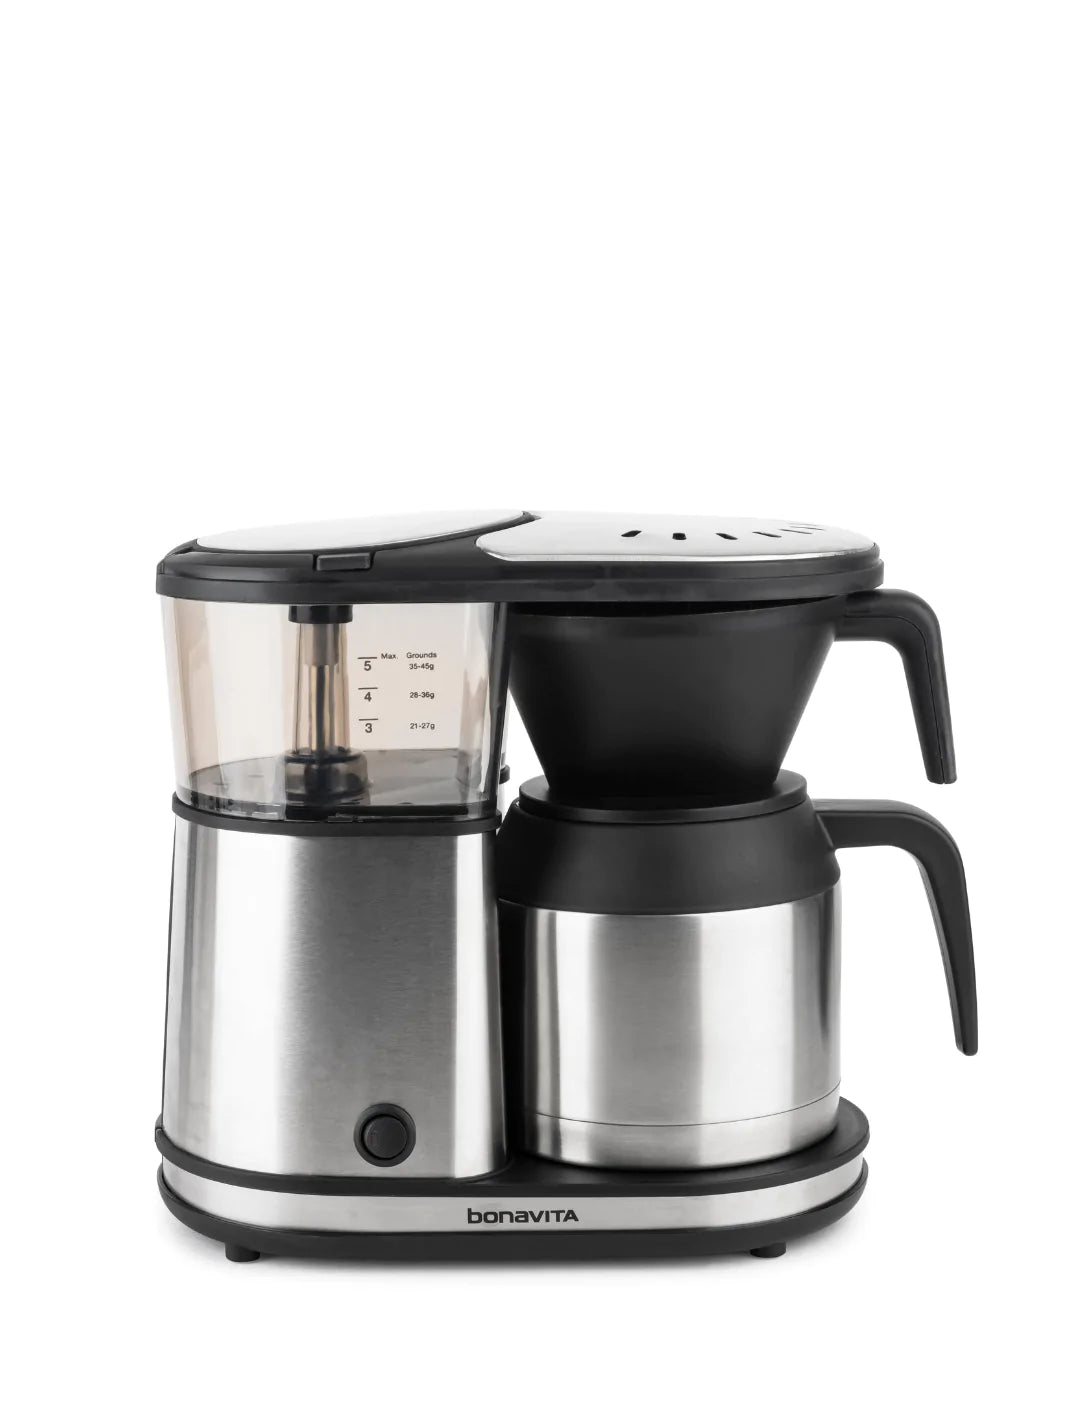 BONAVITA One-Touch - Thermal Carafe Coffee Brewer (5-Cup)